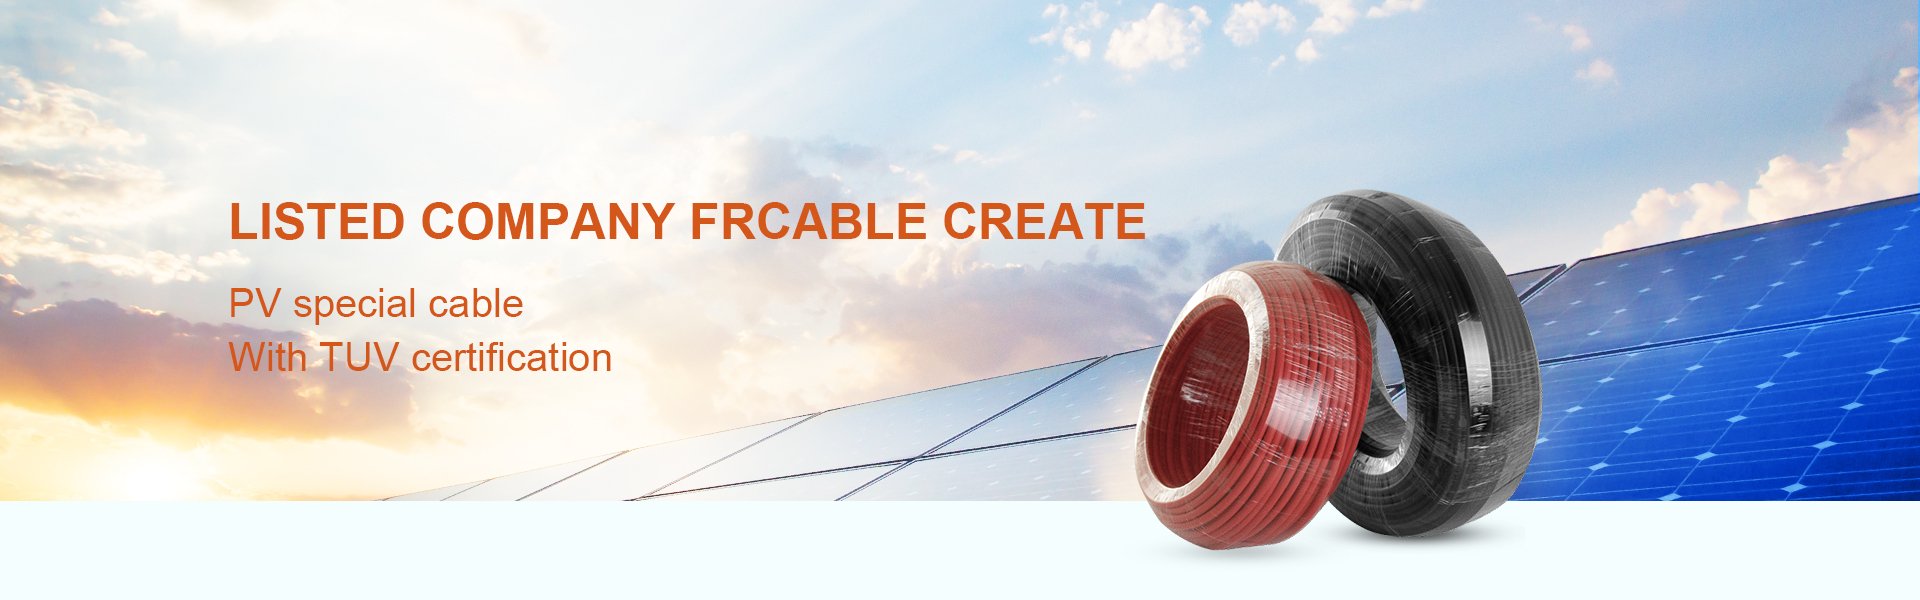 pv cable, solar cable, frcable